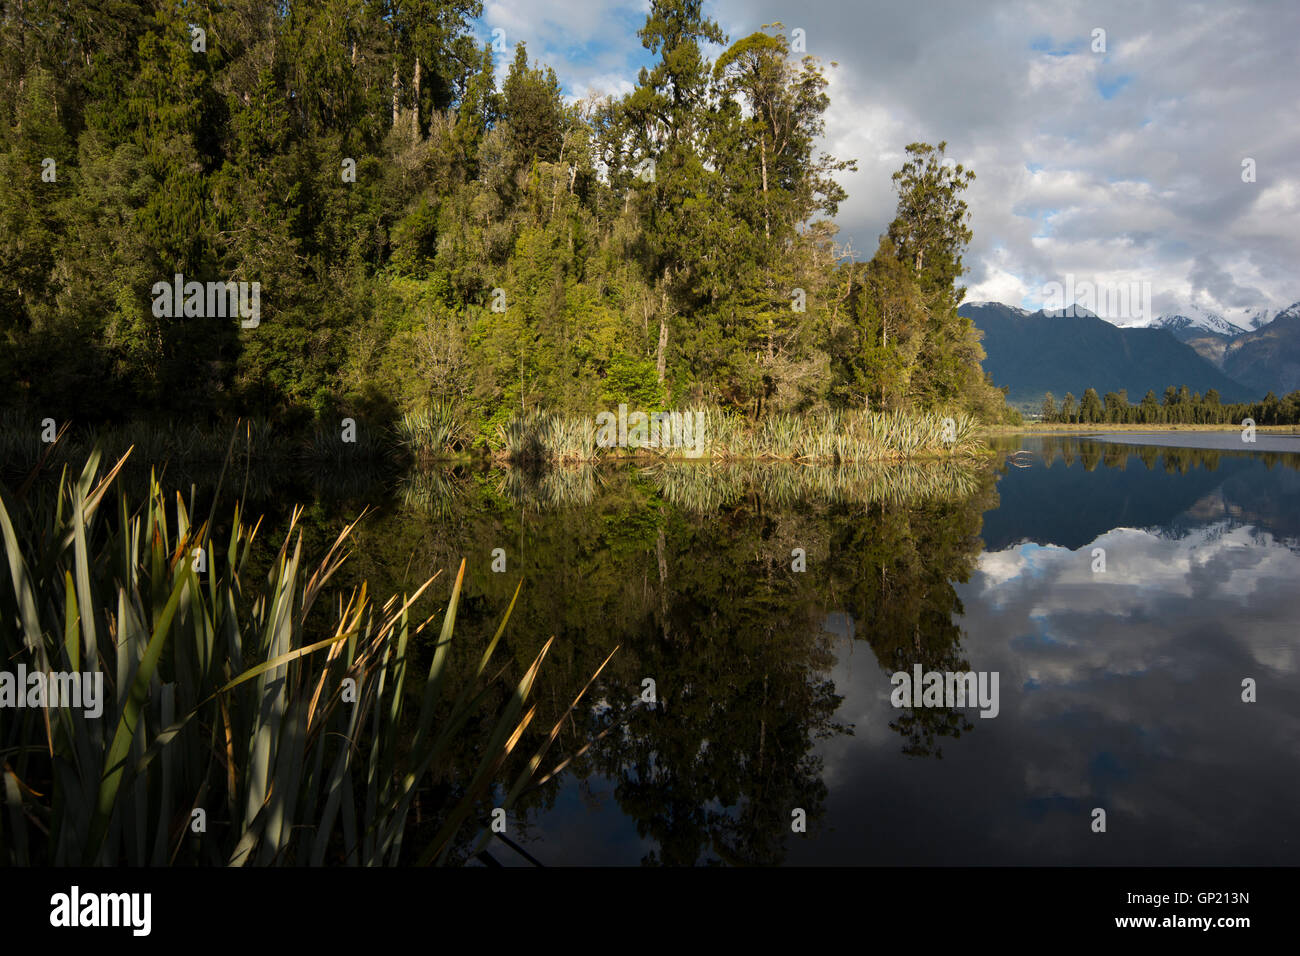 Lake Matheson near Fox Glacier in the West Coast Region of New Zealand is surrounded by a dense forest with Rimu and Kahikatea. Stock Photo